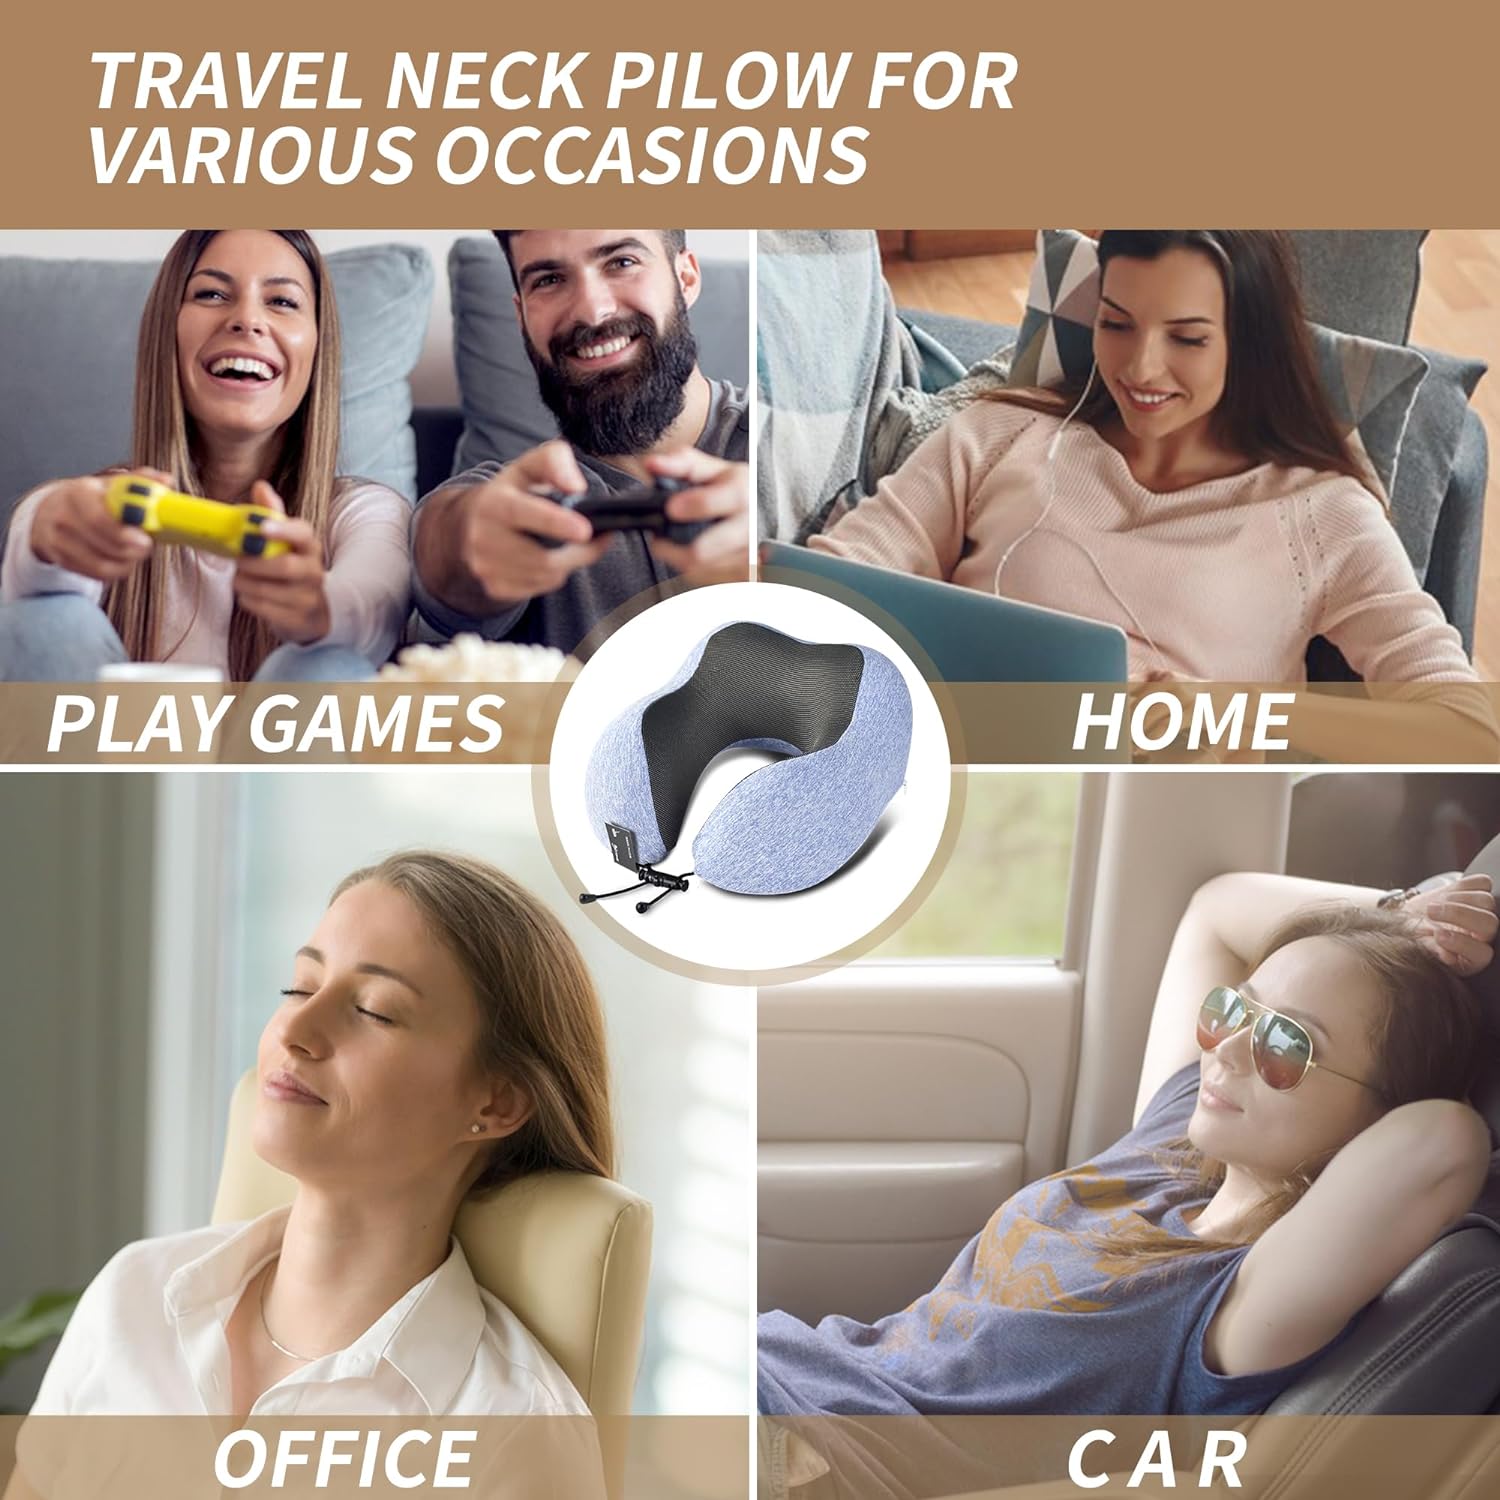 BIGTONE Travel Pillow 100% Pure Memory Foam Neck Pillow, Comfortable & Breathable Cover, Machine Washable, Airplane Travel Kit with 3D Contoured Eye Masks, Earplugs, and Luxury Bag, Standard (Blue)